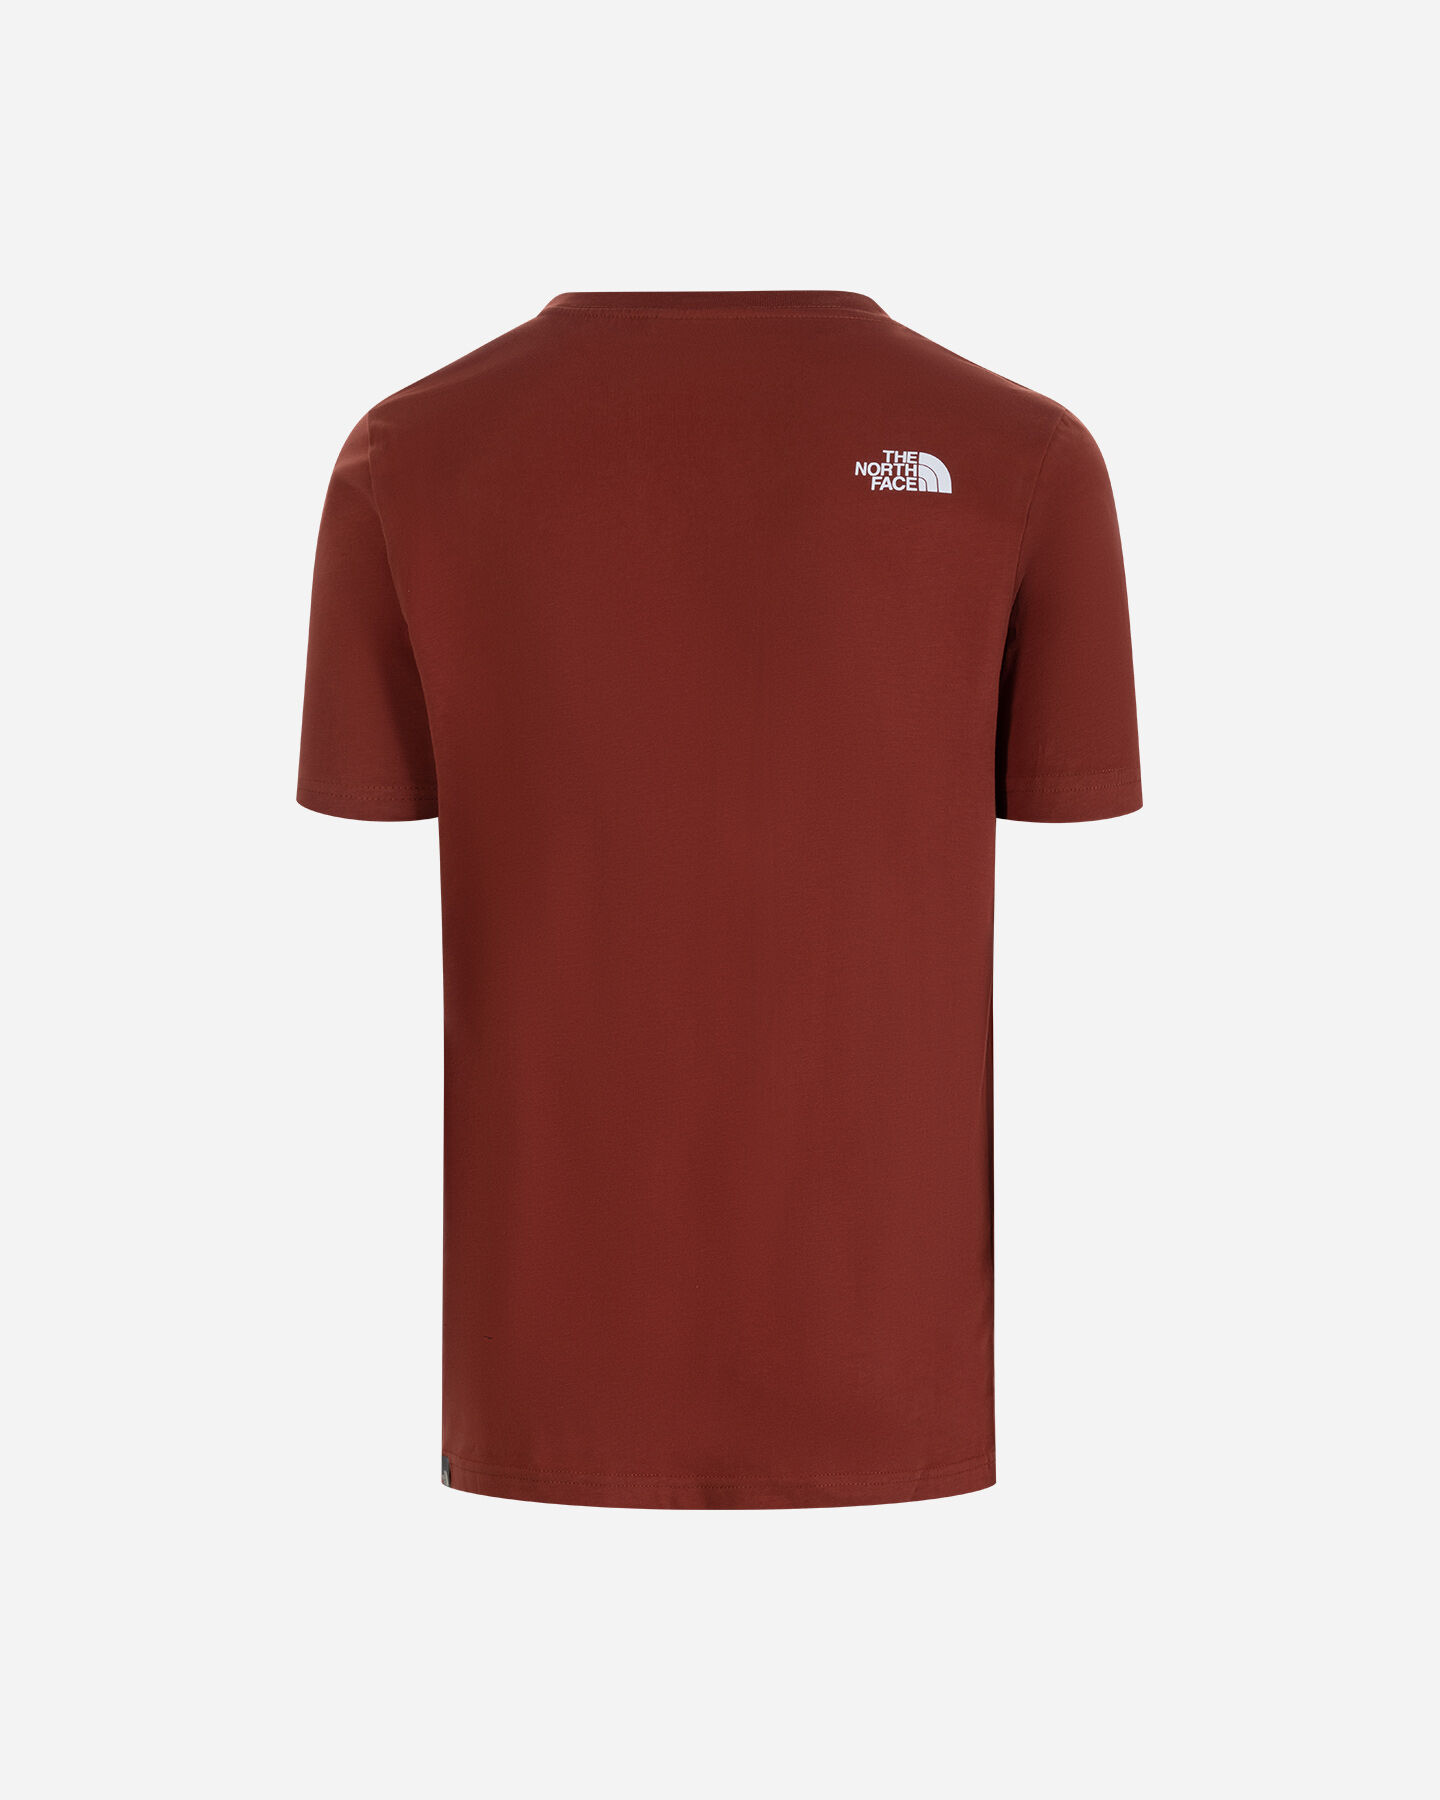  T-Shirt THE NORTH FACE LOGO TACUNE M S5612373|UBC|S scatto 1